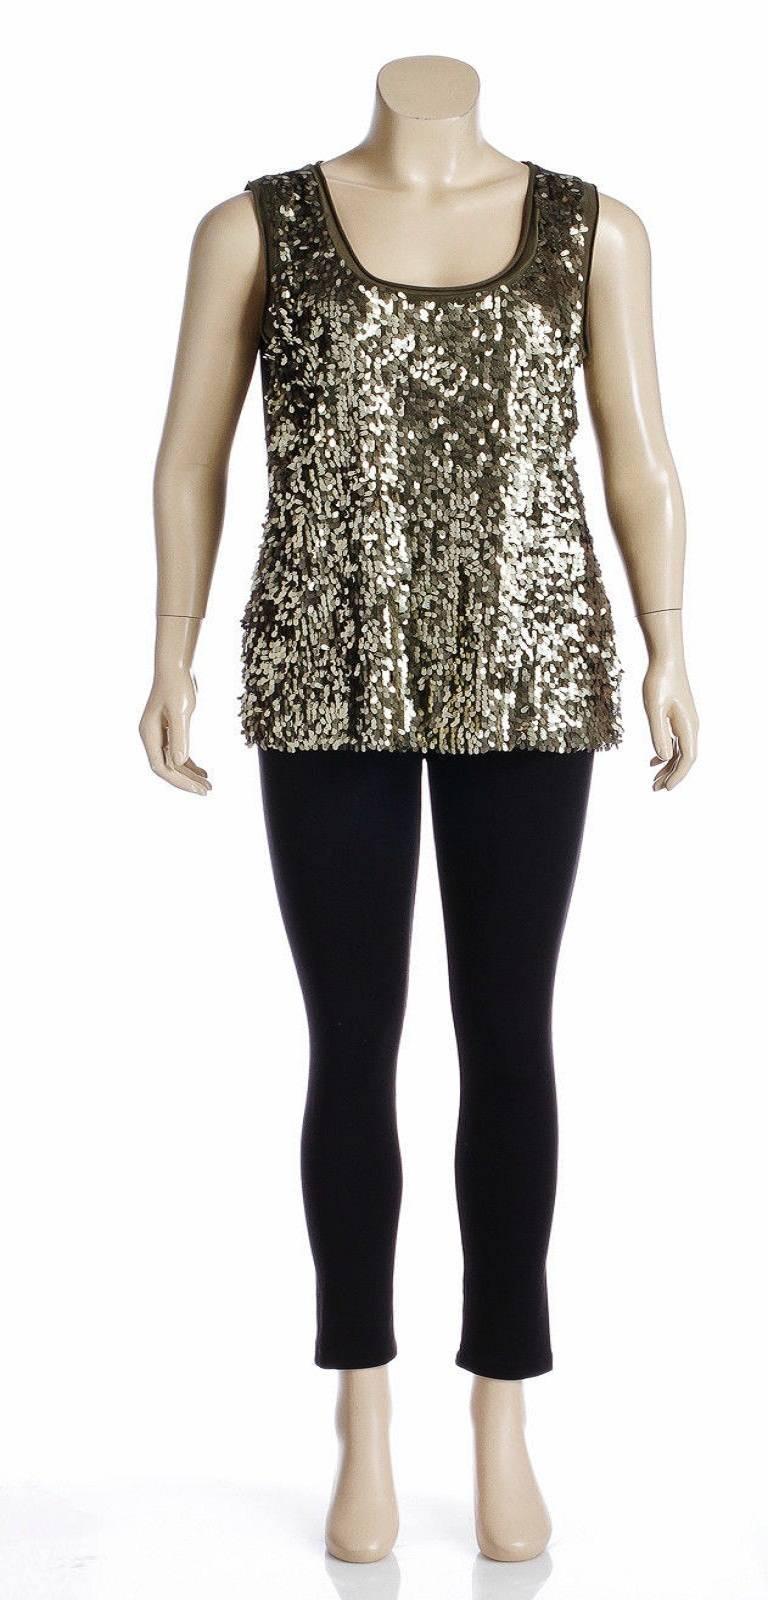  Shine like the star you are in this one of a kind top by Calvin Klein! This gorgeous top features a scoop neck and the front is covered with sparkling sequins that is sure to catch some attention! You can wear with a sharp blazer for a fun office